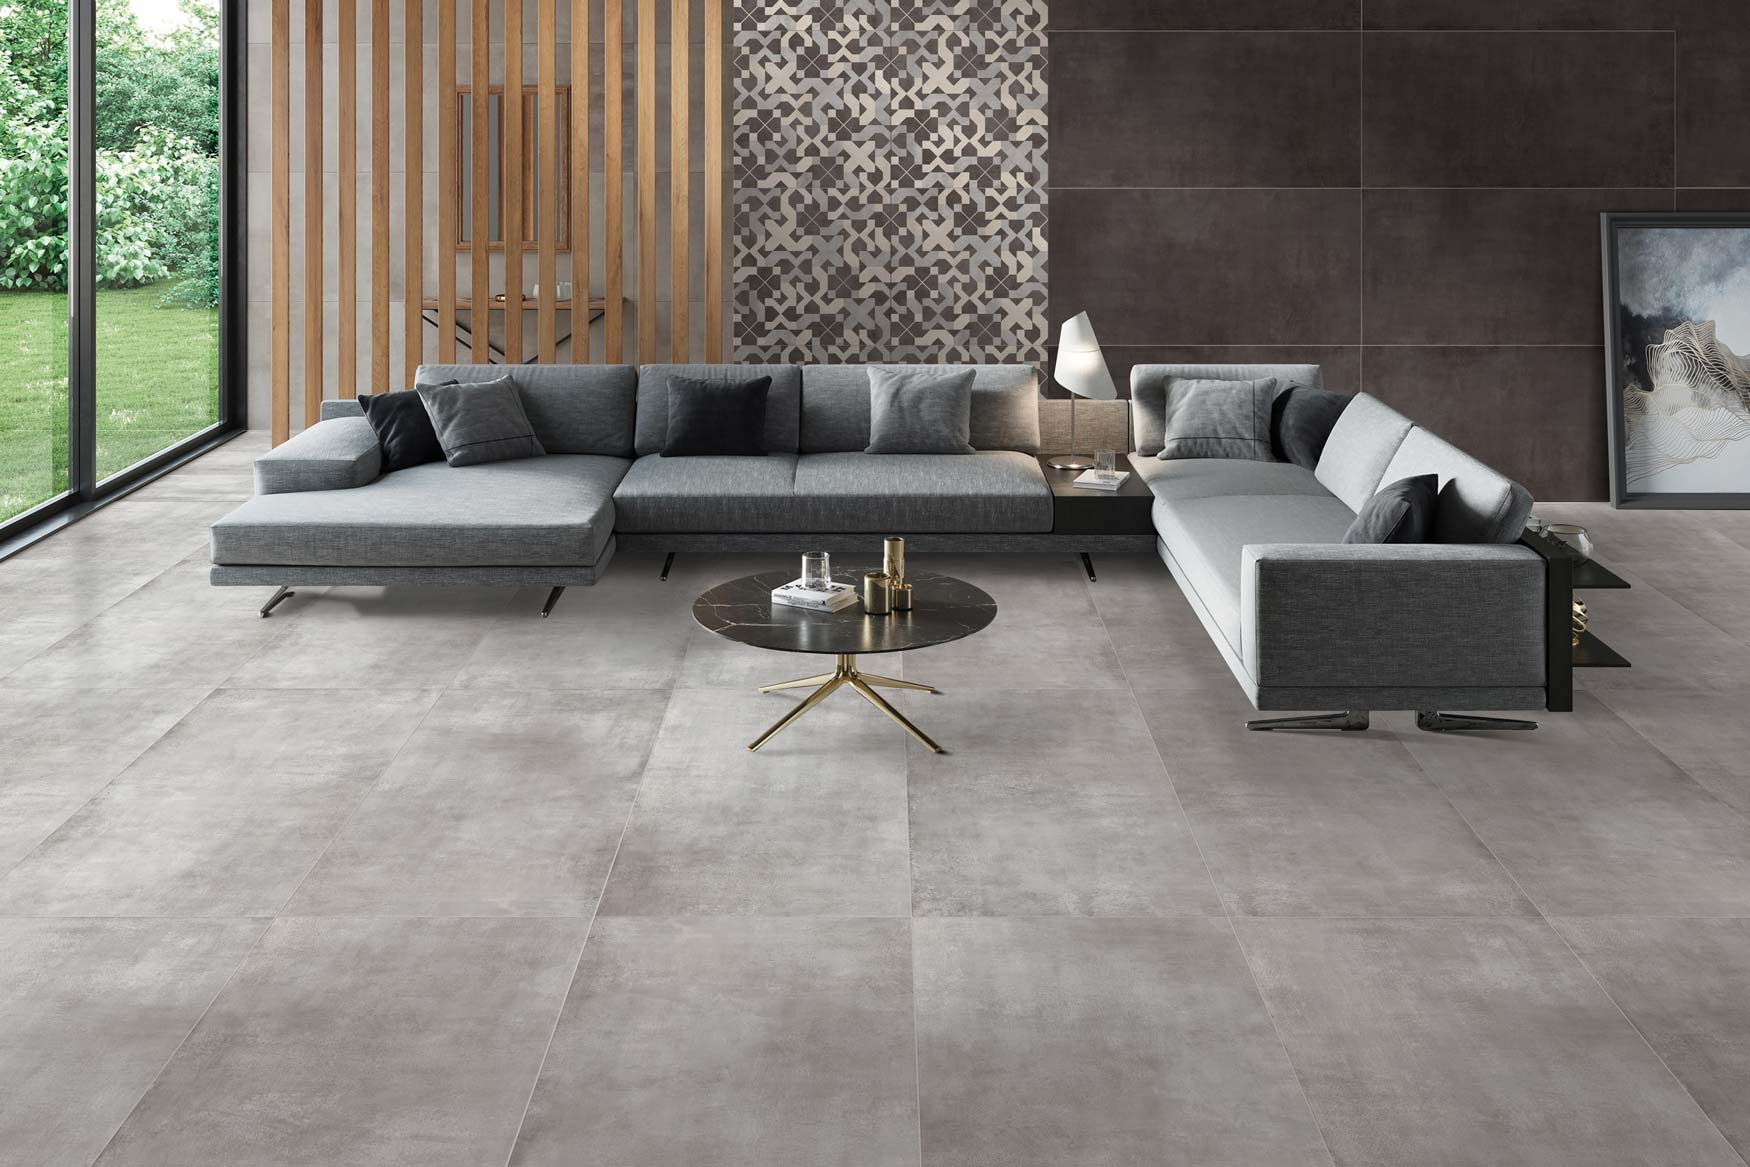 Hottest Trends in Glazed Porcelain Tiles: A Guide to Stylish Designs in 2023